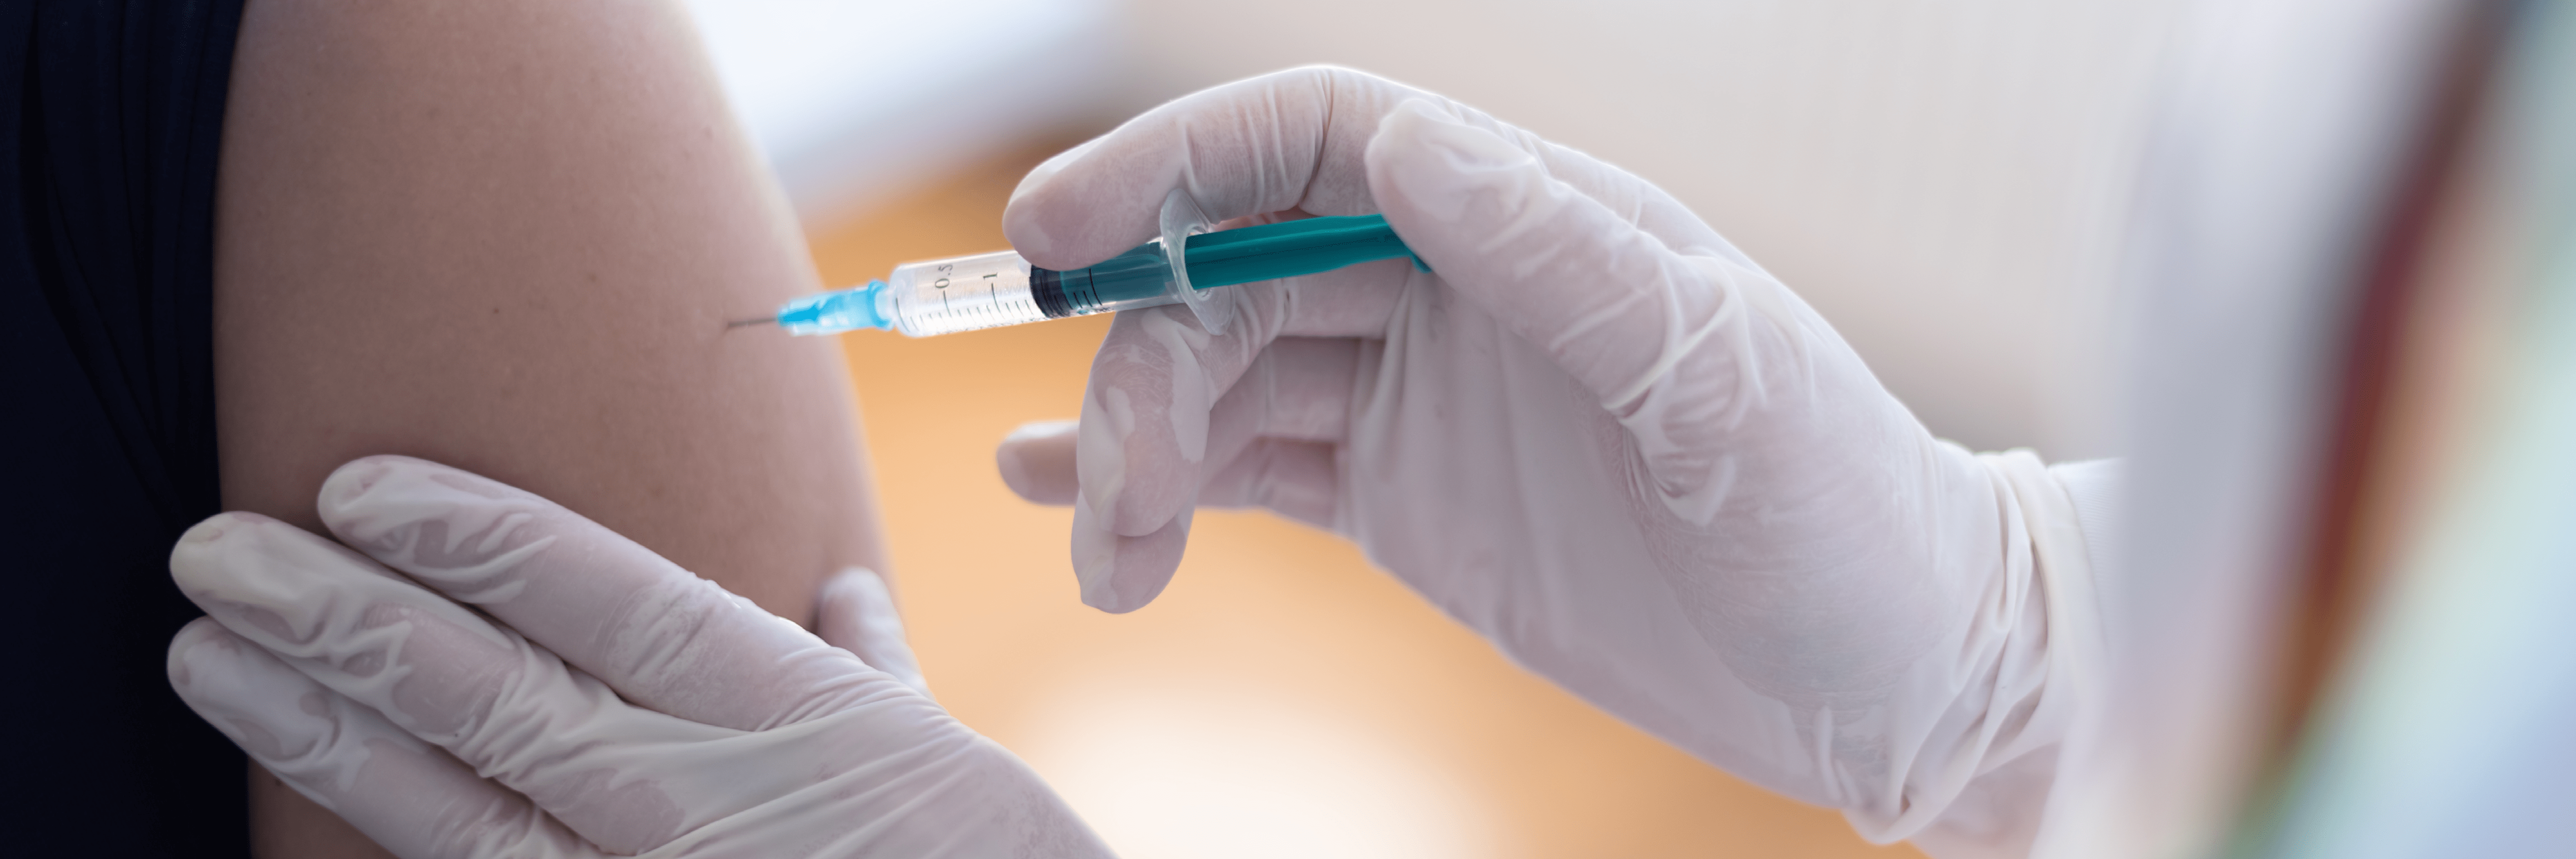 Everything You Need to Know About Getting the Flu Vaccine as a Person With Disability